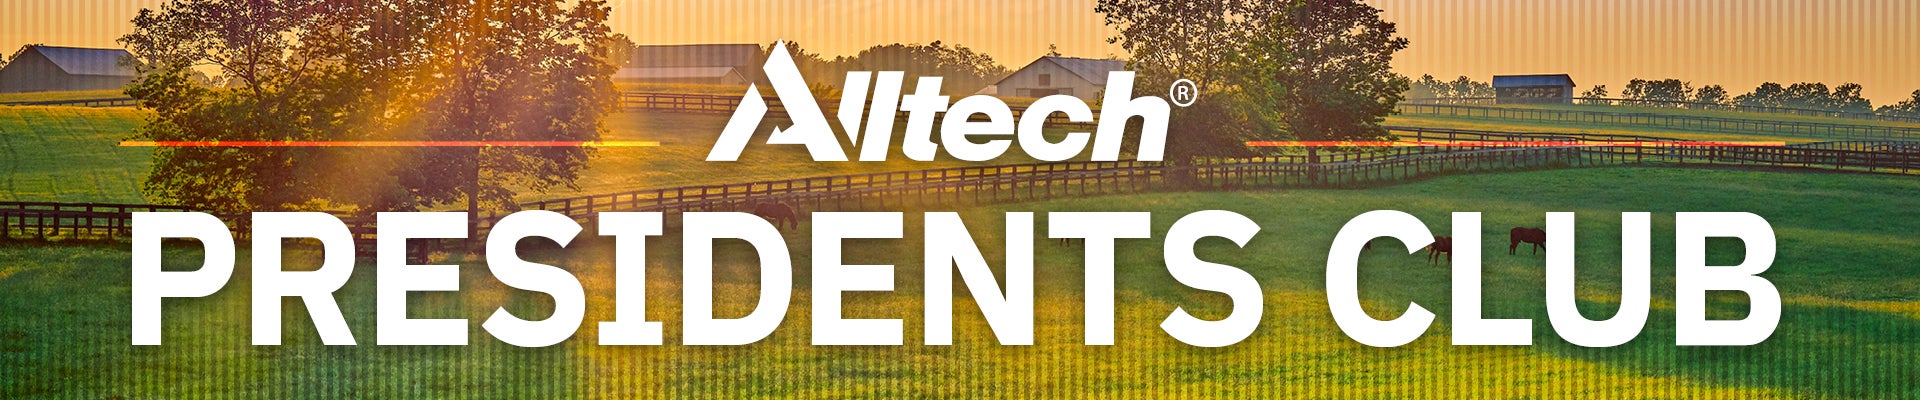 Alltech Presidents Club Website Header with a picturesque Kentucky background